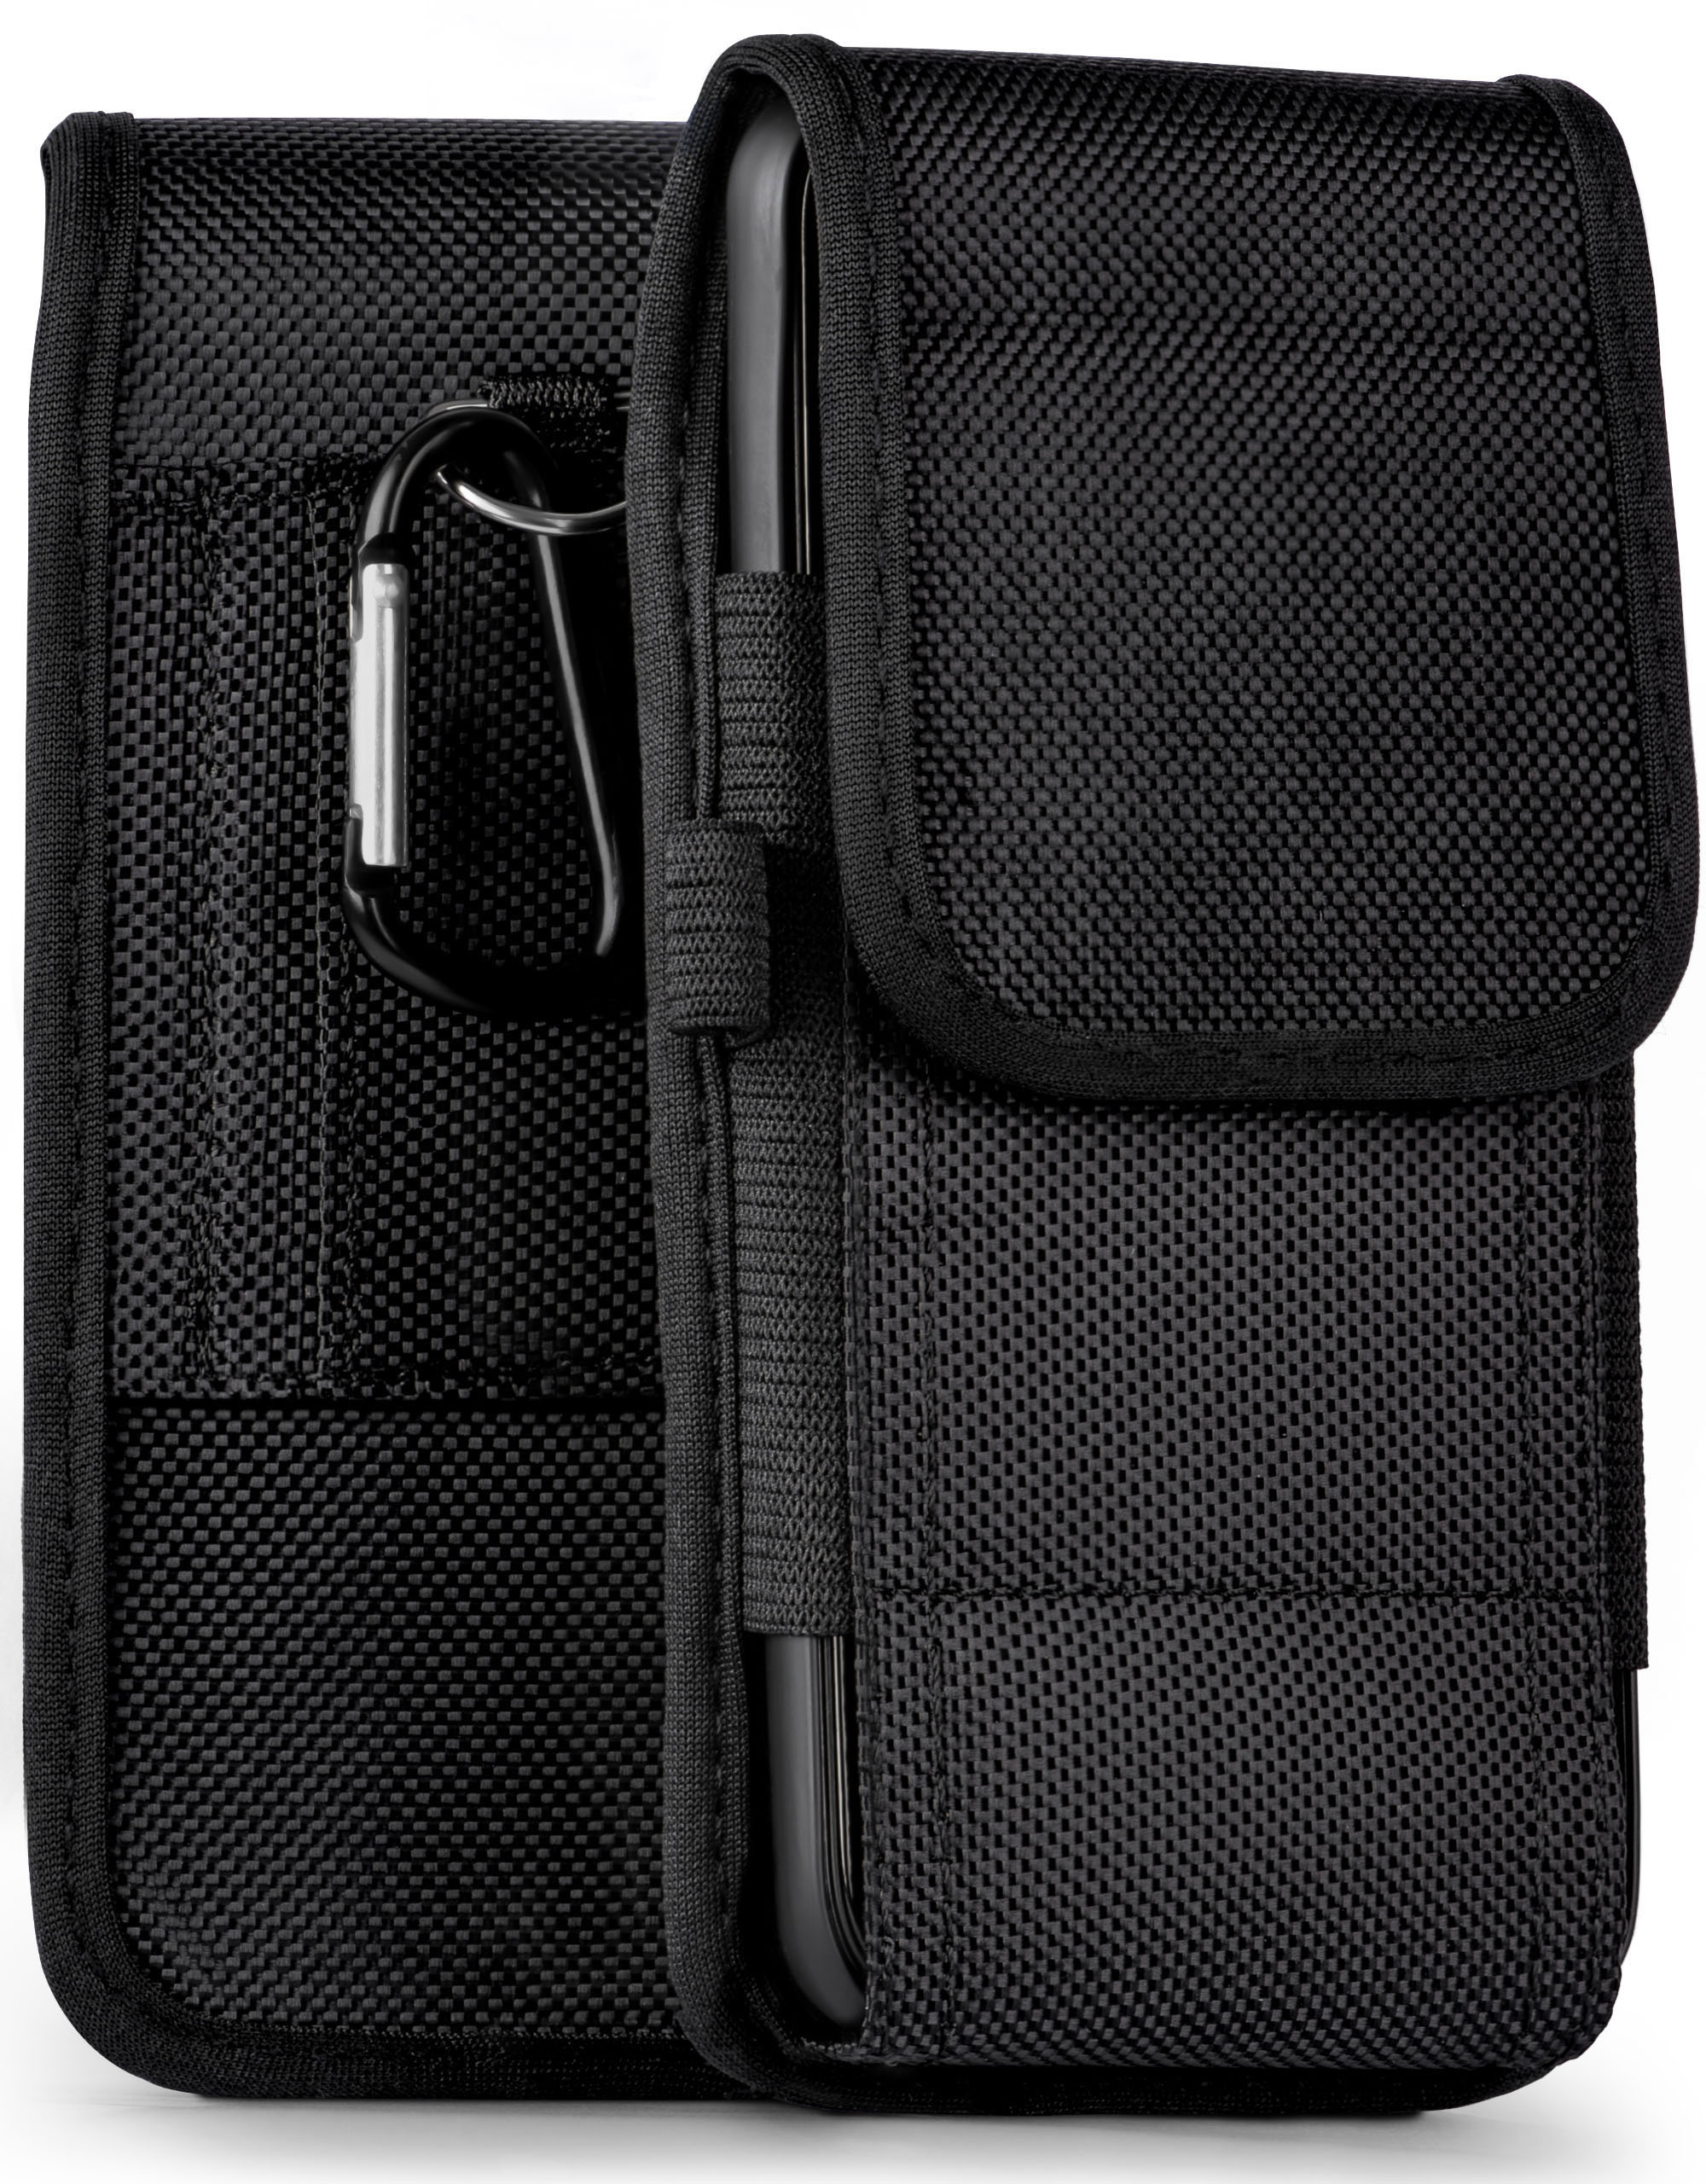 Holster, ASUS, Asus Case, Trail MOEX Agility 3, Zenfone